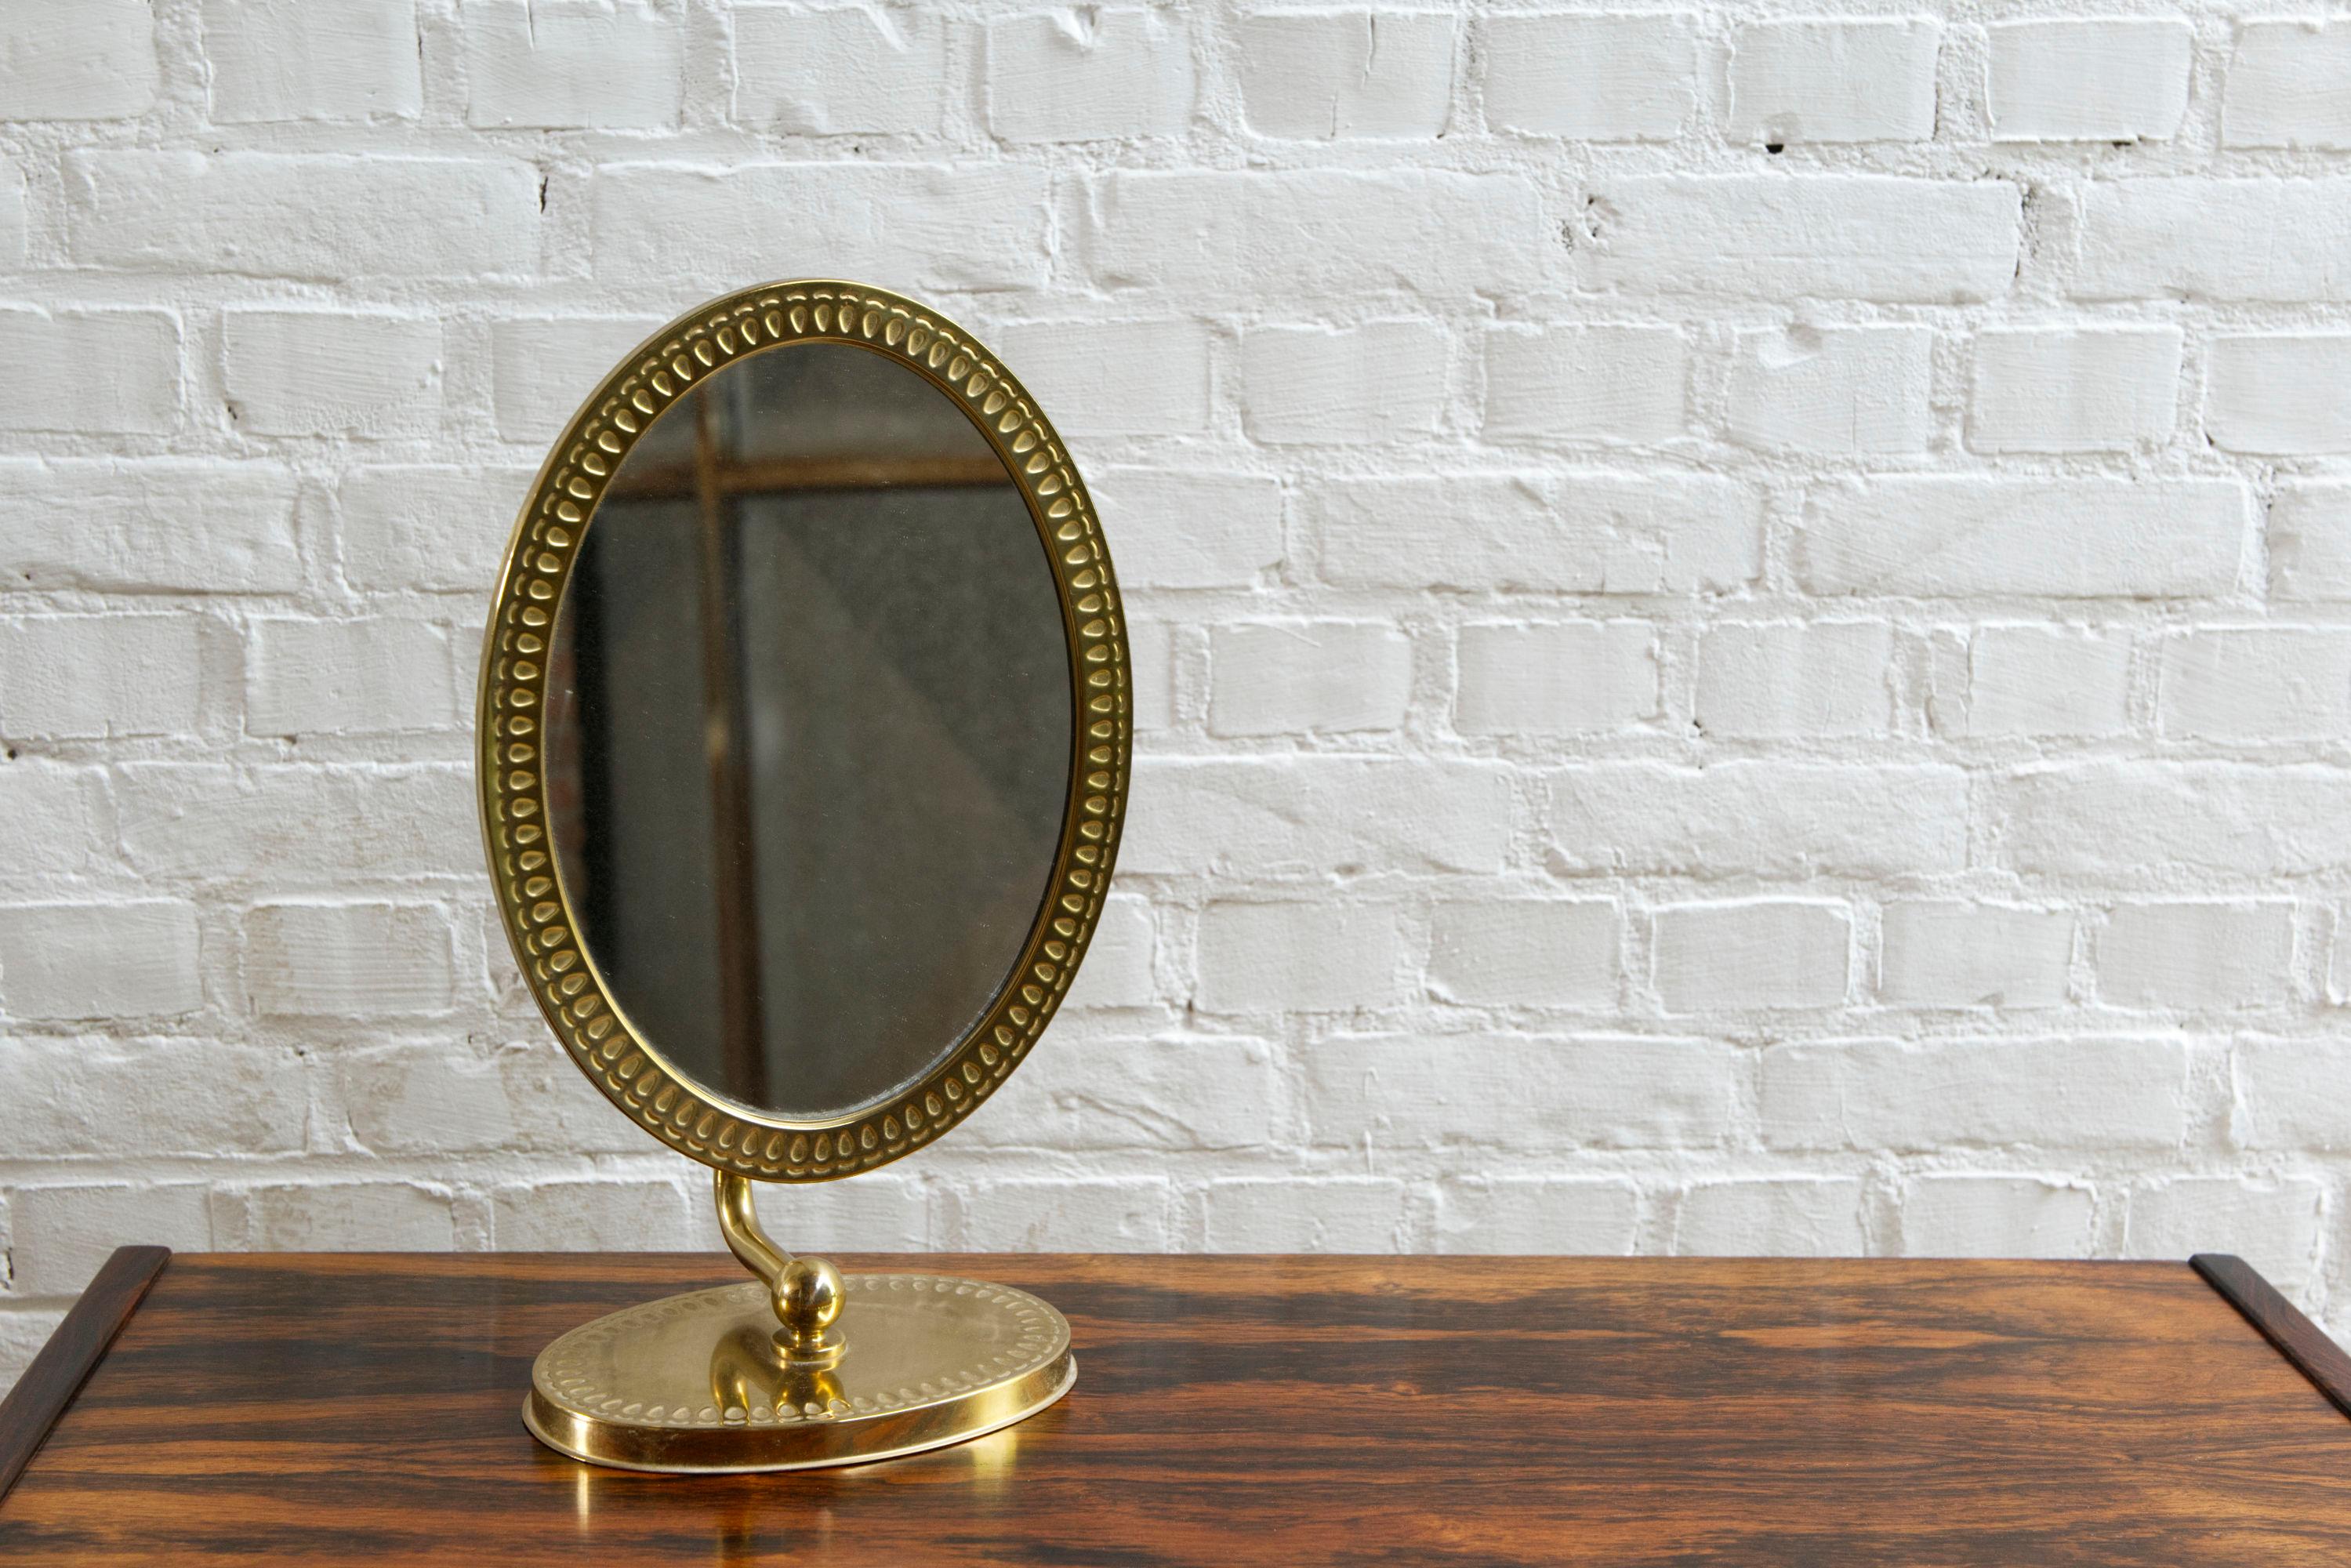 A beautiful 'Swedish modern' brass table mirror from Swedish manufacturer 'Titti'. Labeled on the bottom with article number 4.186.

Adjustable from vertical to horizontal position and in angle. Compact in size and perfect for use on a make up table